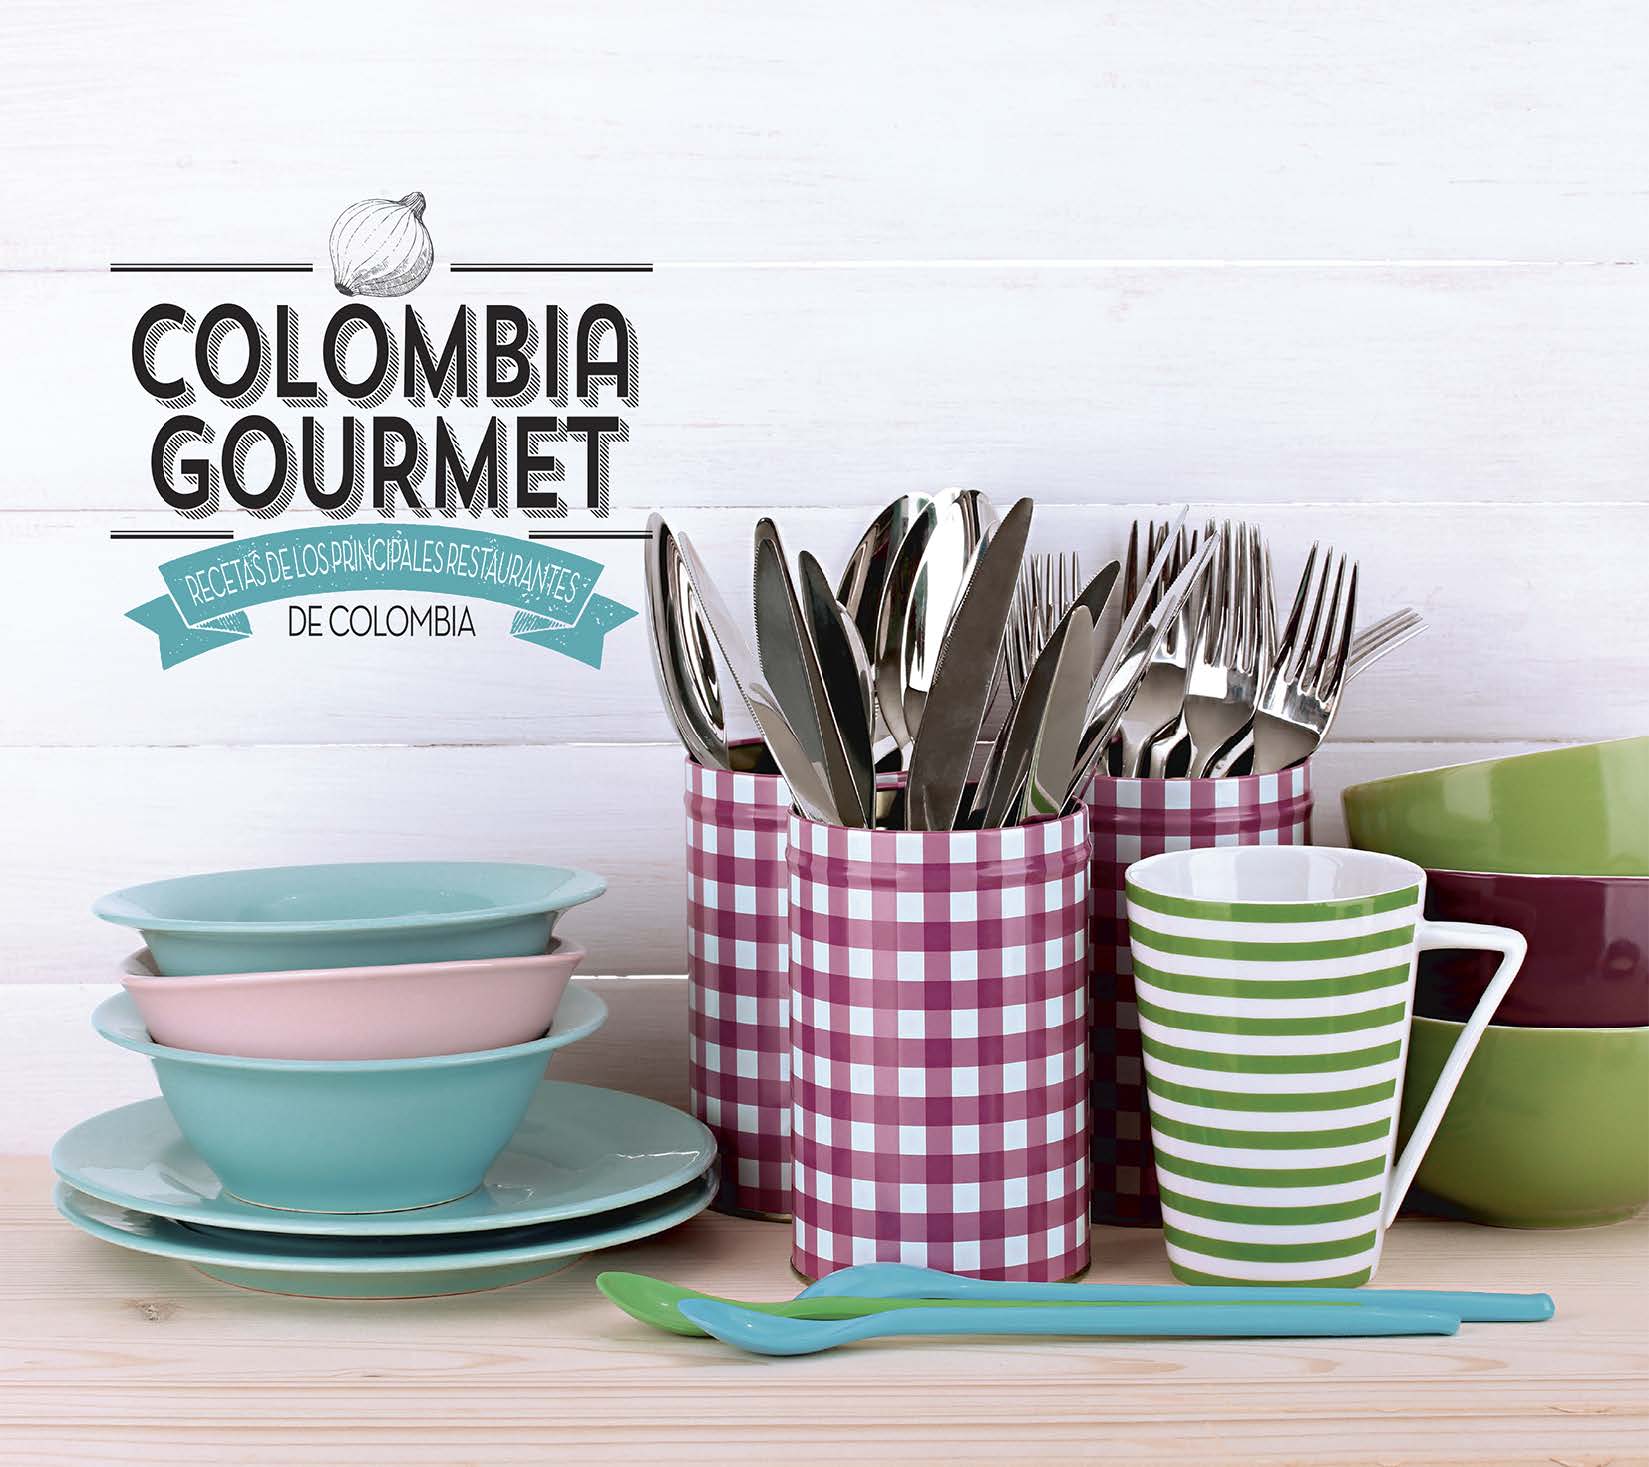 Colombia Gourmet 2014